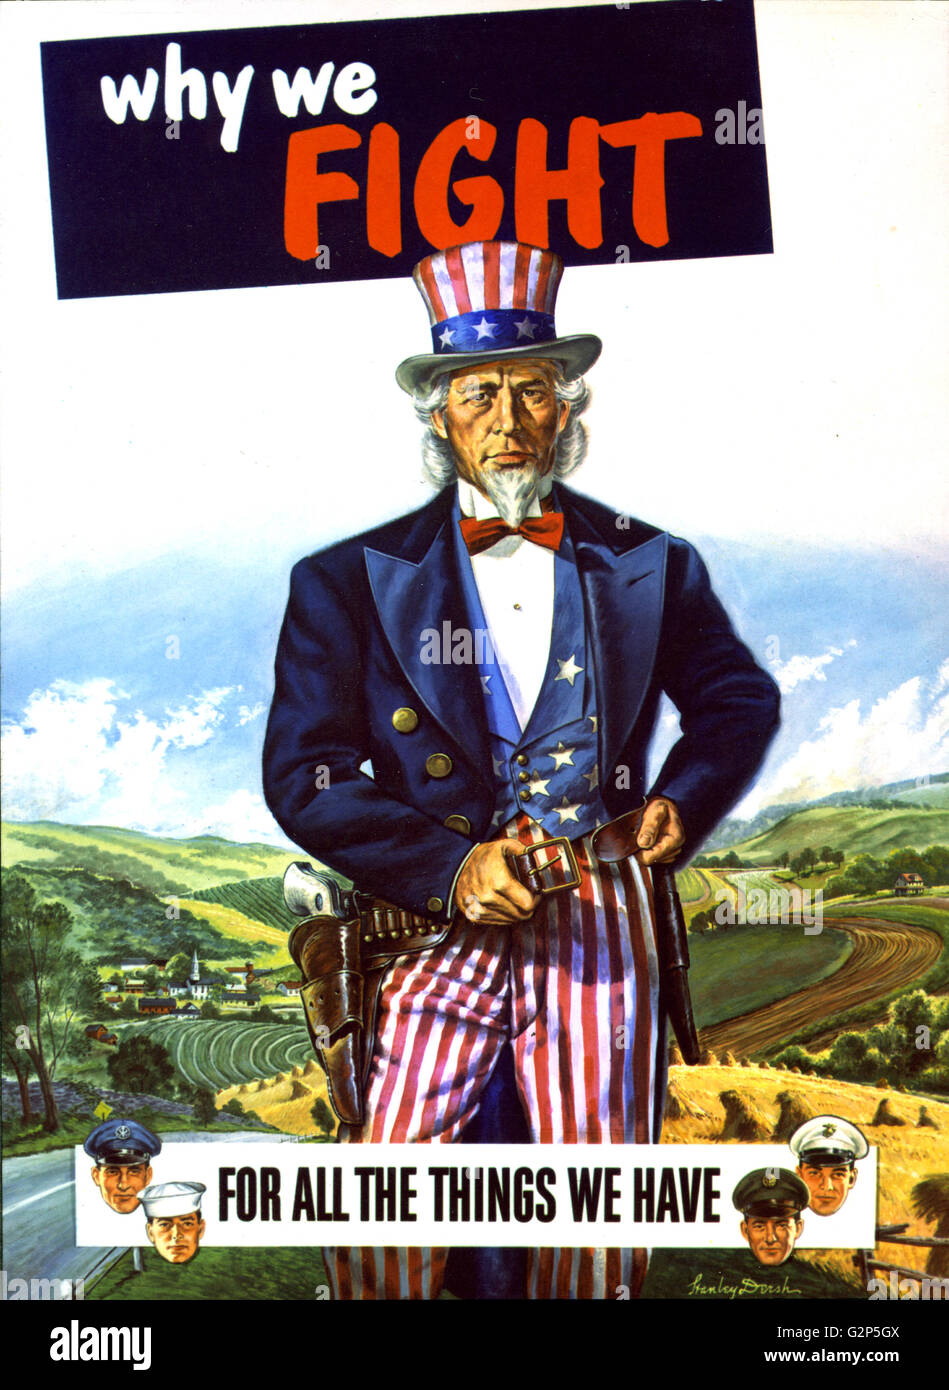 Post-World War II poster painting showing Uncle Sam, assisted by men of all branches of the U.S. military, ready to defend the American way of life. Stanley Dersh, artist. Stock Photo